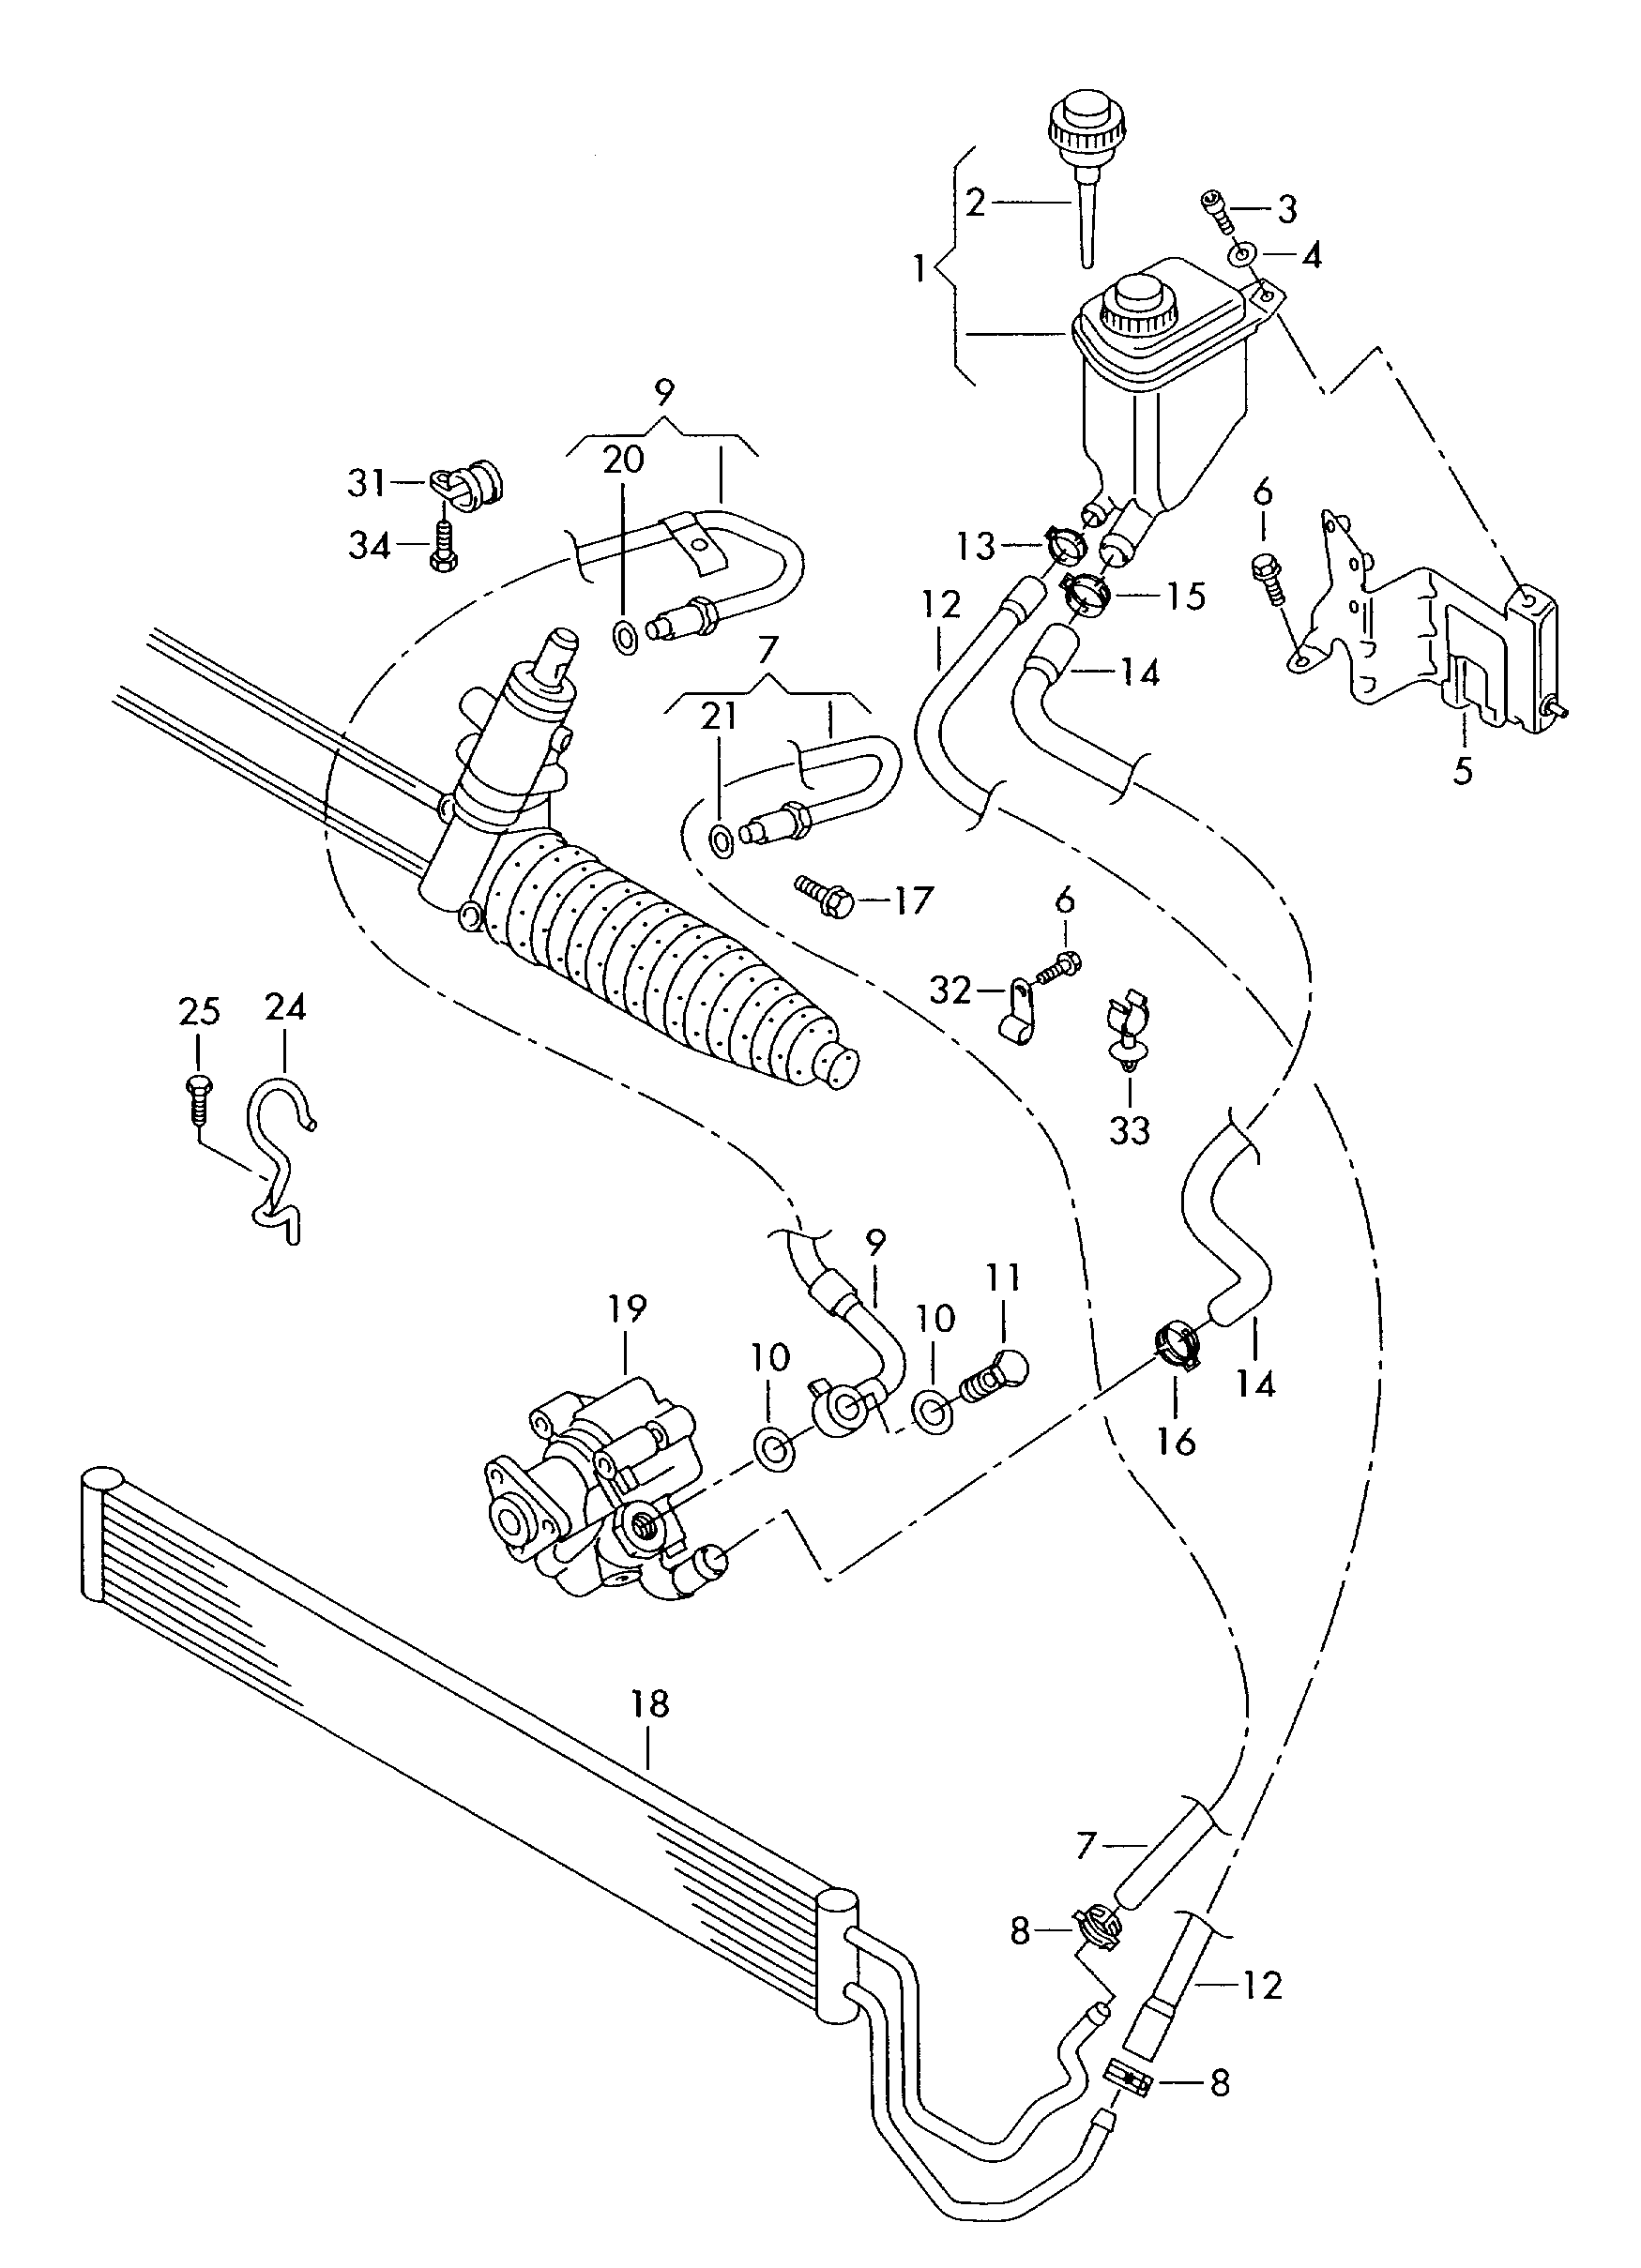 oil container and connection
parts, hoses - Touareg(TOUA)  